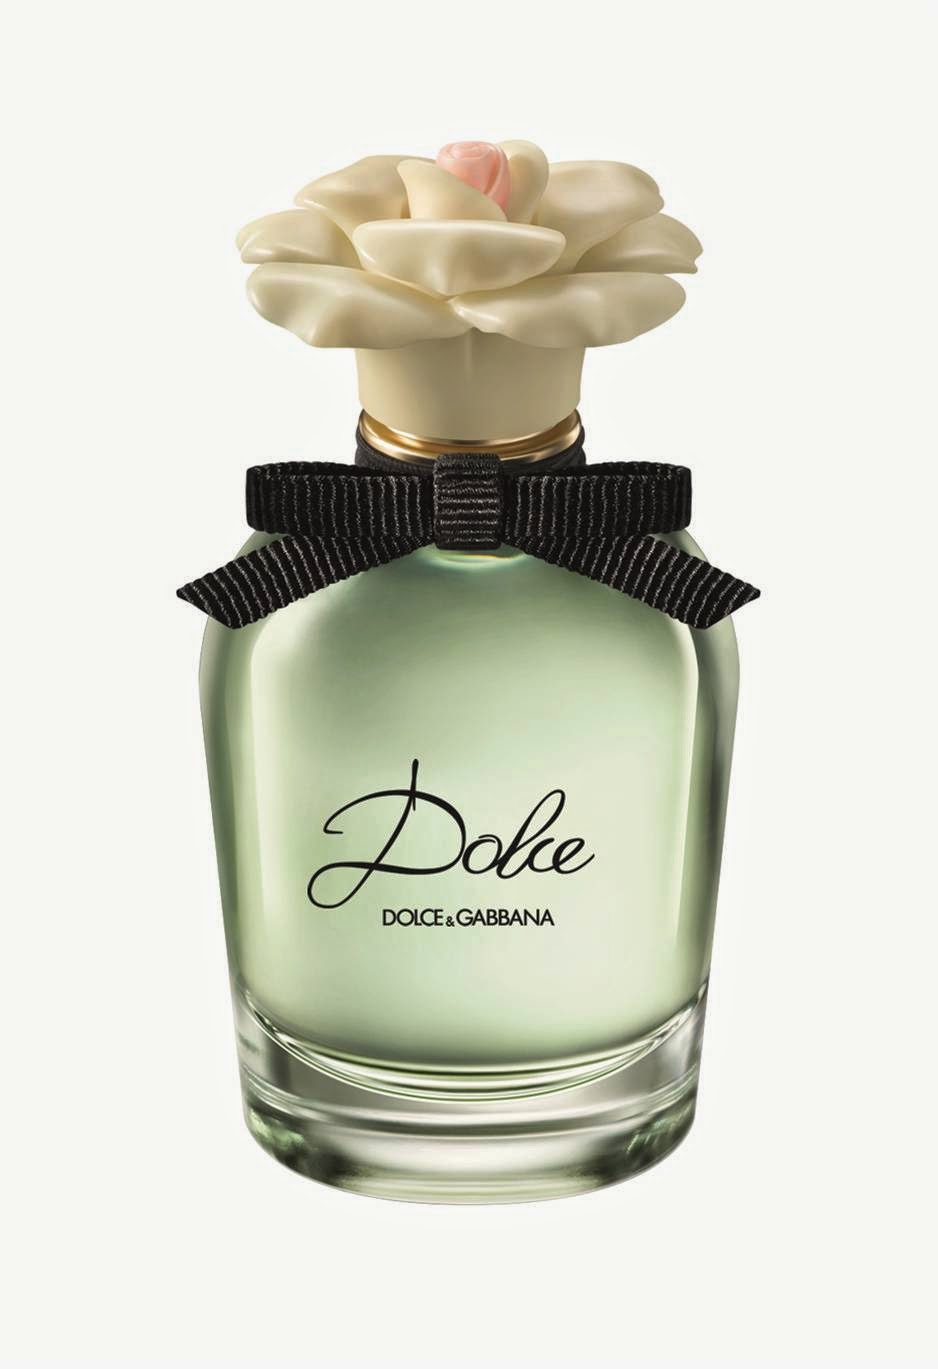 Dolce by Dolce & Gabbana, Dolce, Dolce & Gabbana, Fragrance, fragrance review